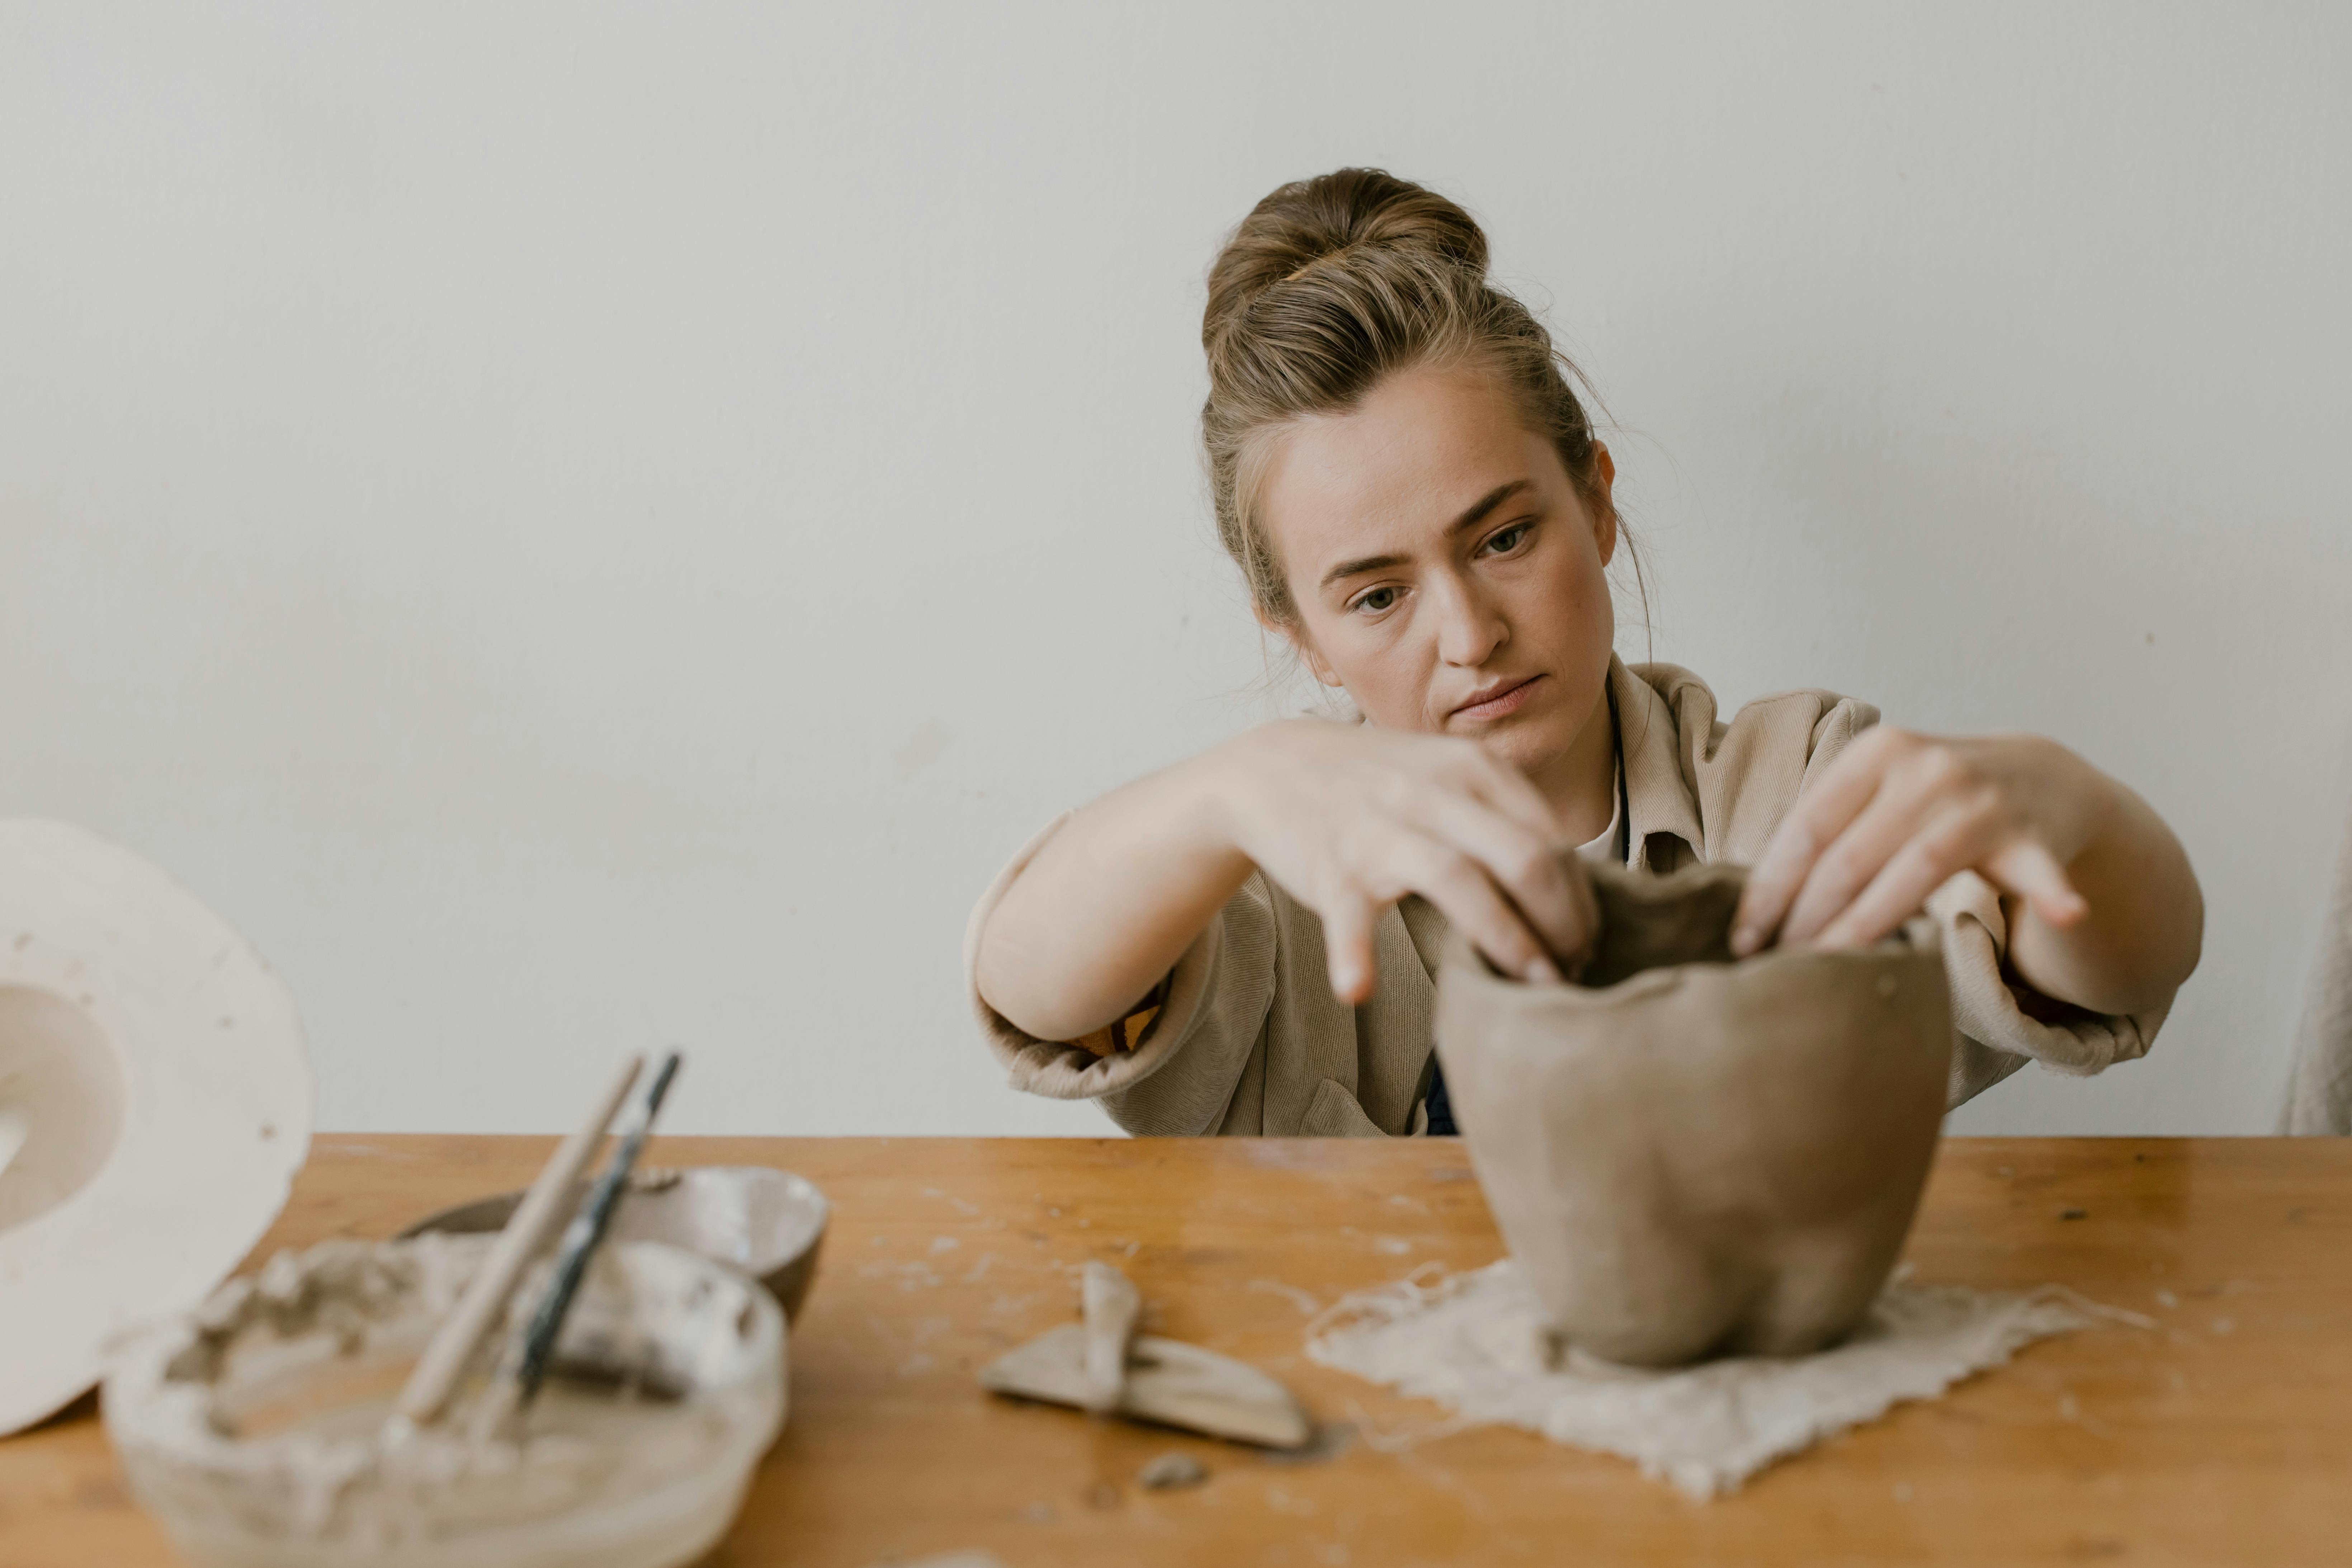 Women Hold Samples Paint Clay Products Stock Photo 2208849671